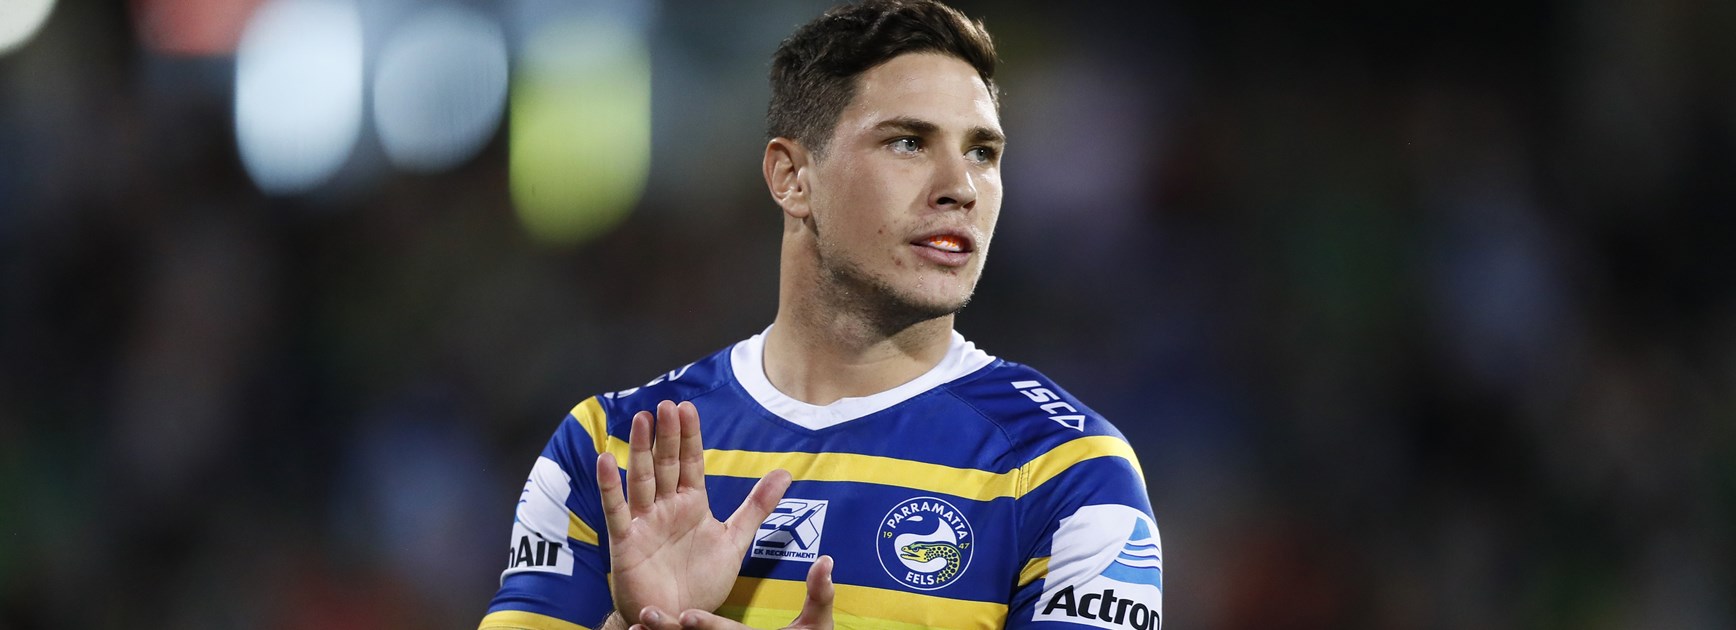 NRL Fantasy halves guide: More than Cleary v Moses